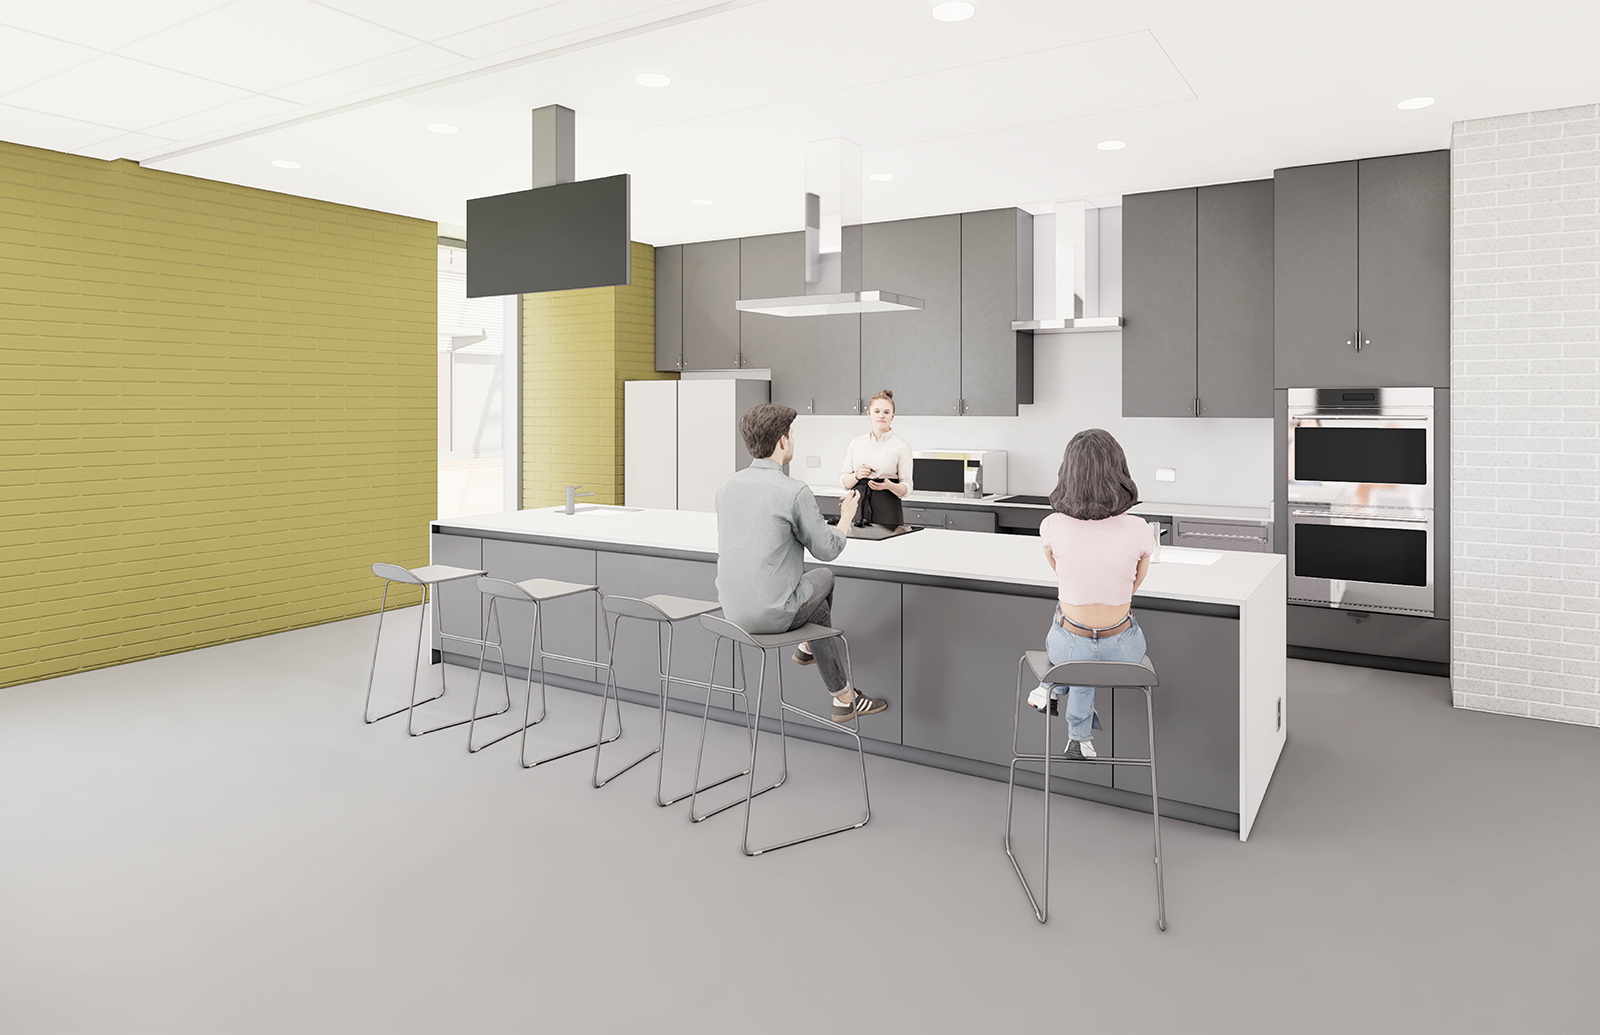 A rendering of the teaching kitchen. On the left wall is a floor to ceiling window. On the back wall are cupboards for storage, a fridge, ovens, stovetop, and exhaust. In front of the back wall is a large kitchen island with a sink and storage. On top of the island is a ceiling-mounted TV to be used when cooking classes are in session, to show students a close-up of the cooking taking place on the kitchen island. Three people are hanging out in the space.